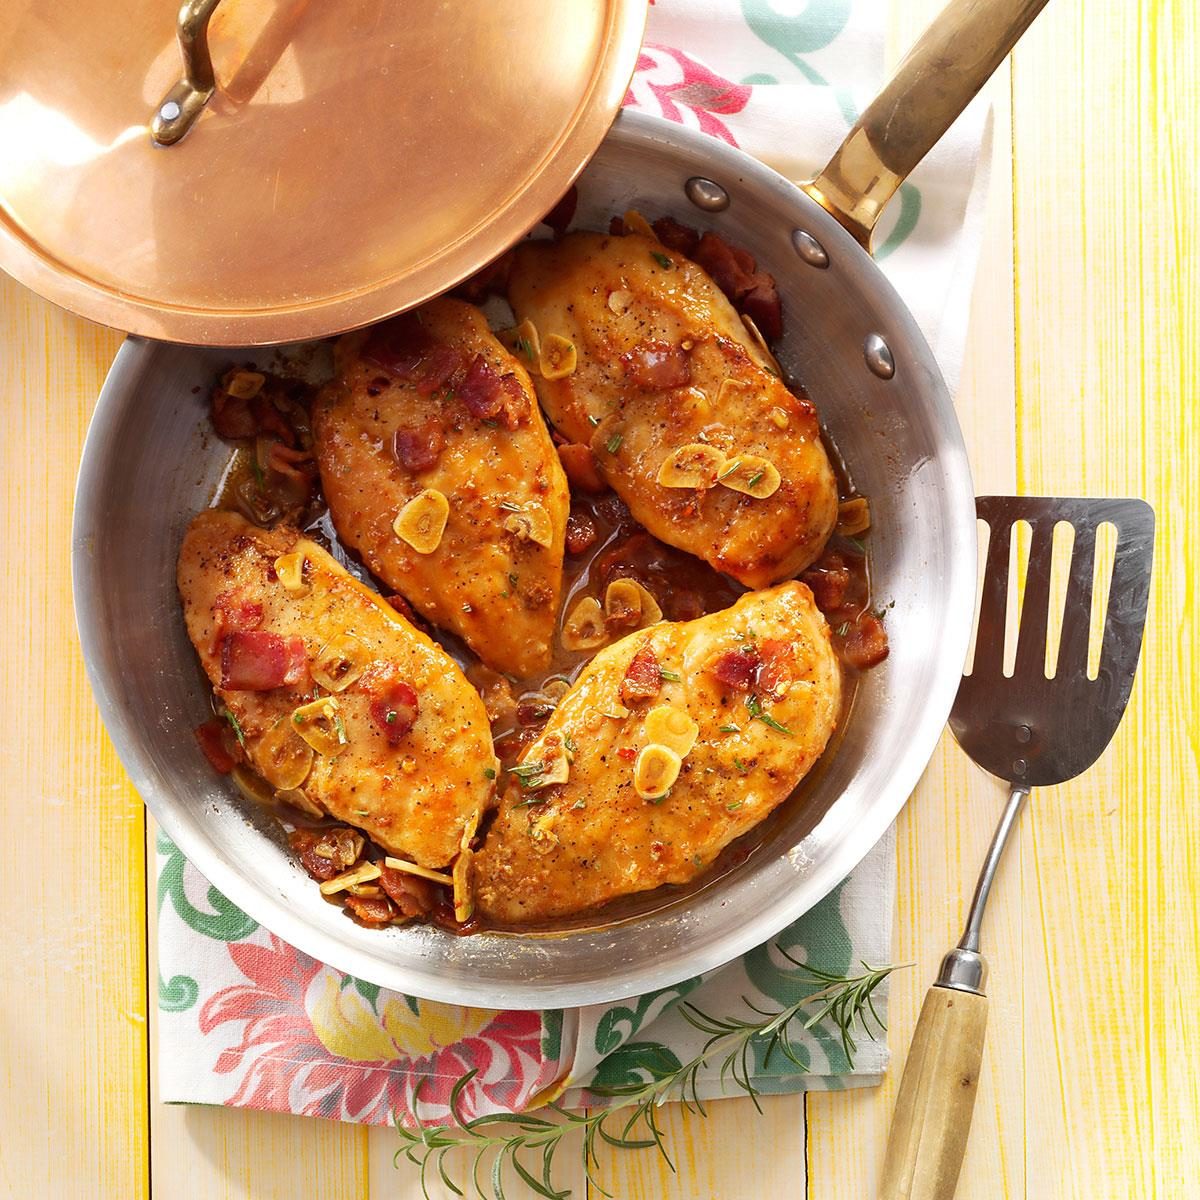 https://www.tasteofhome.com/wp-content/uploads/2018/01/Bacon-Rosemary-Chicken_exps49620_CWAM143041C01_10_2bC_RMS-2.jpg